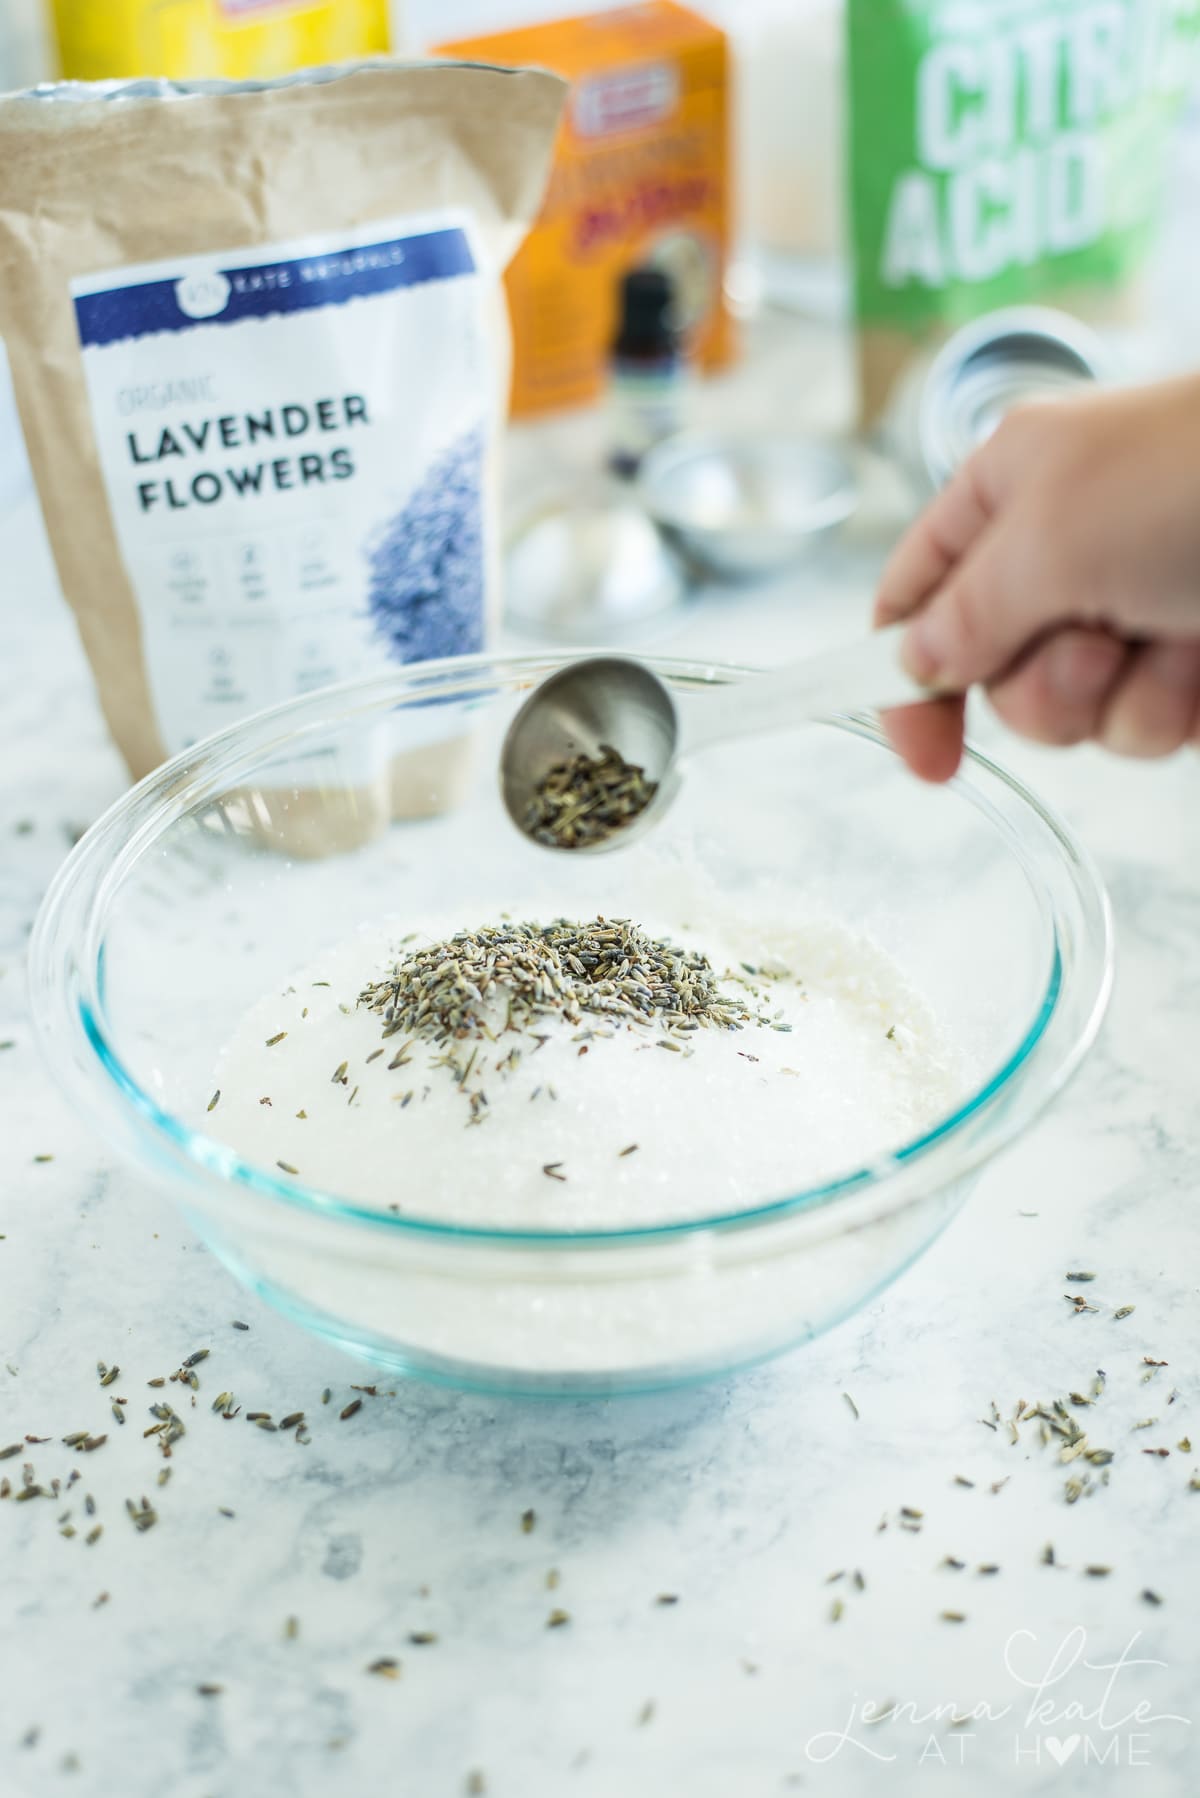 Adding a tablespoon of lavender flowers to a glass bowl  containing baking soda and other dry ingredients